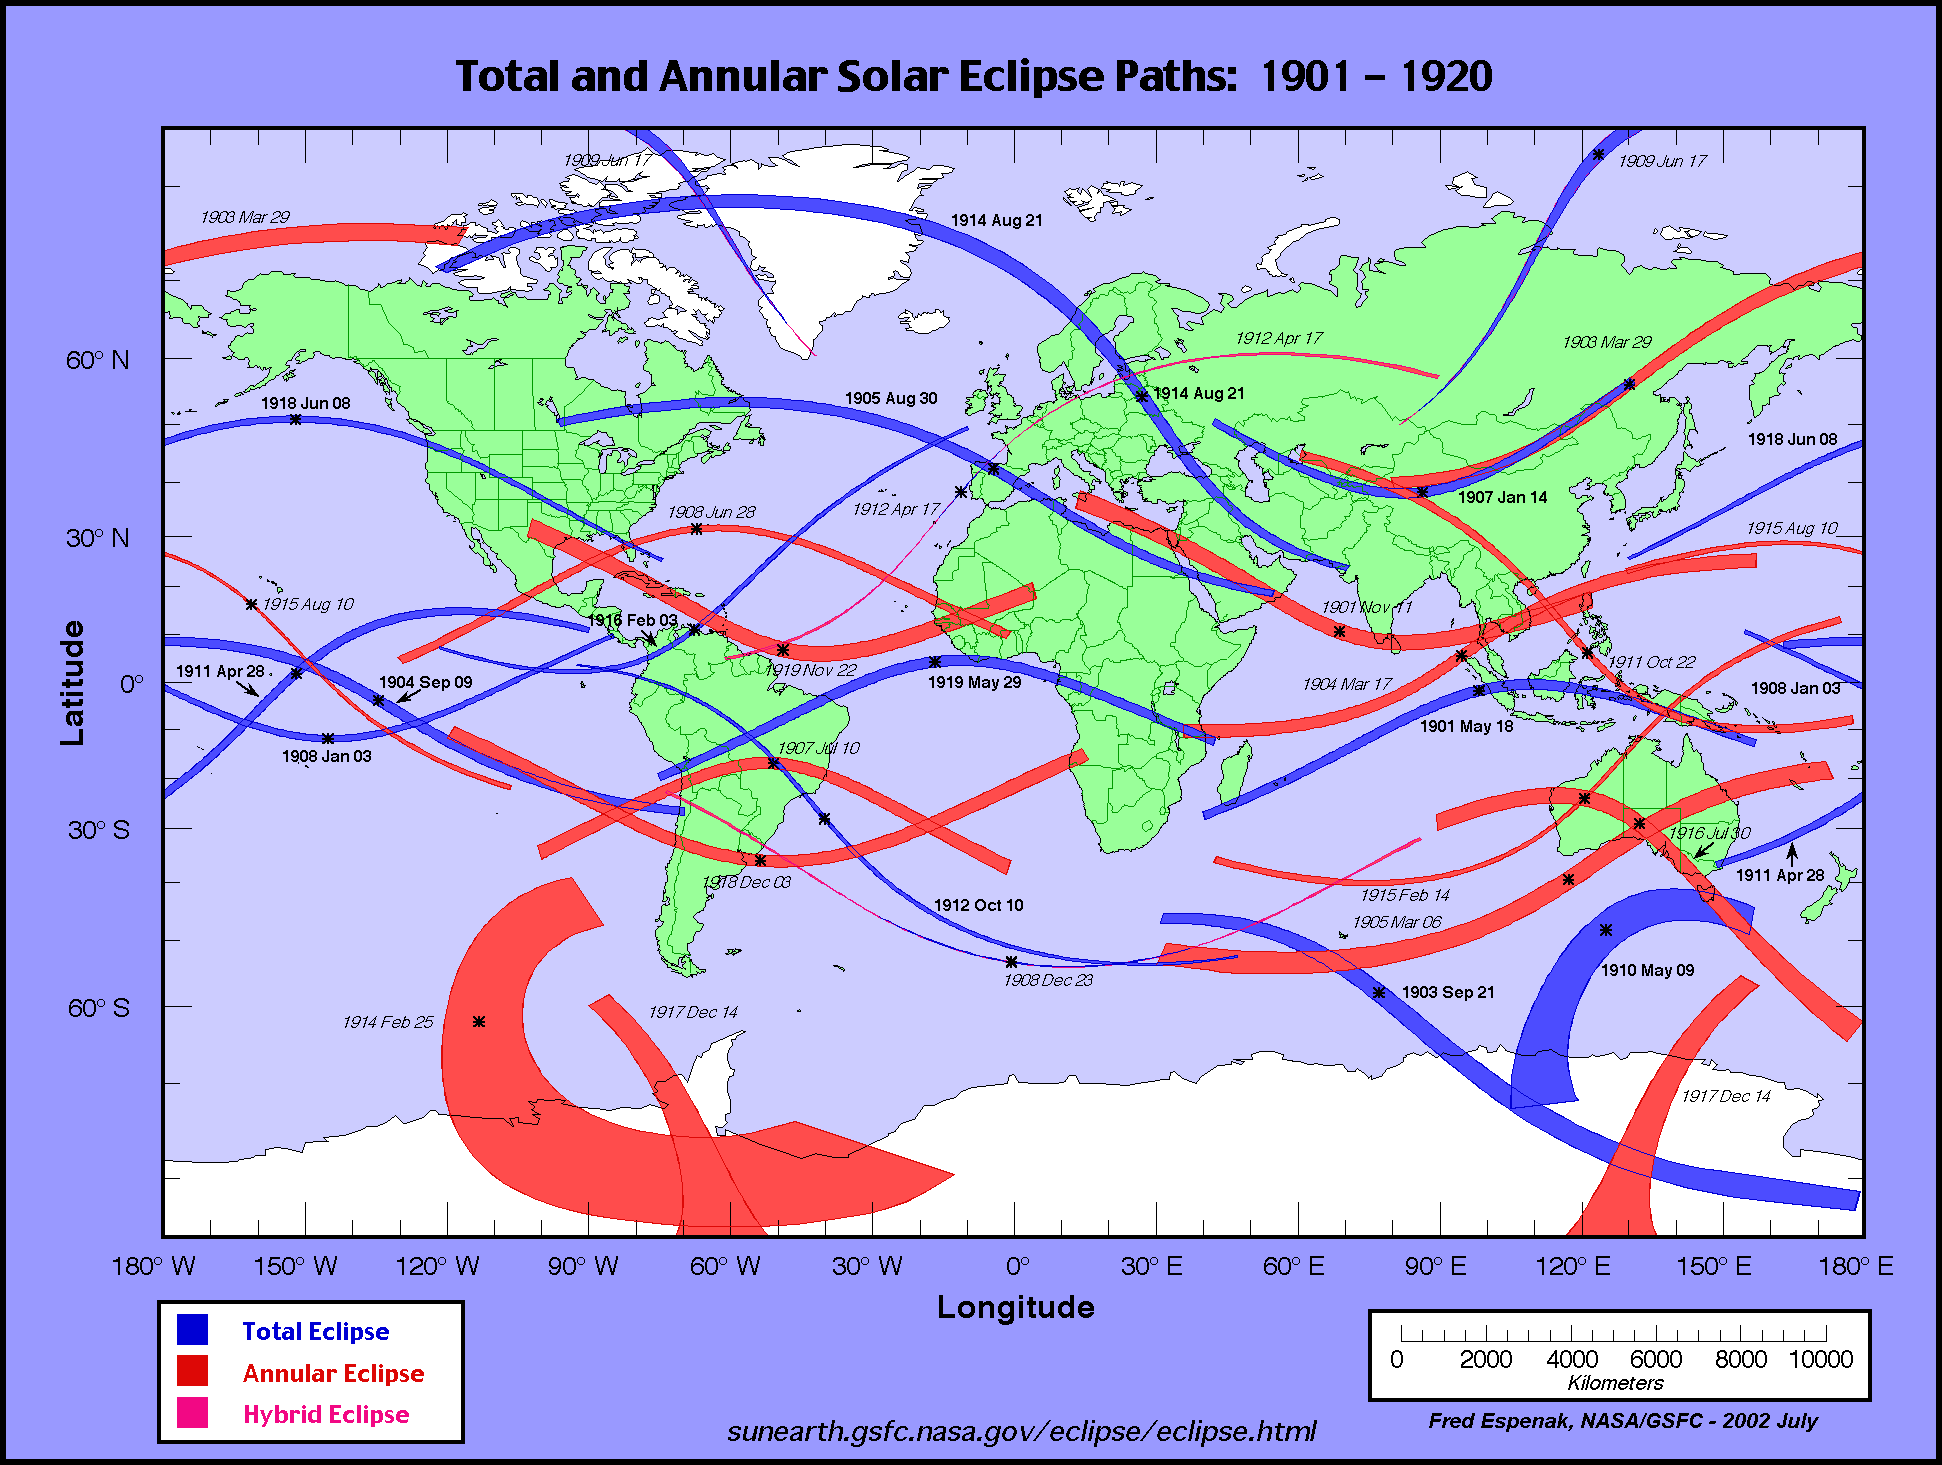 Calendar and solar eclipse maps from 1901 to 1920